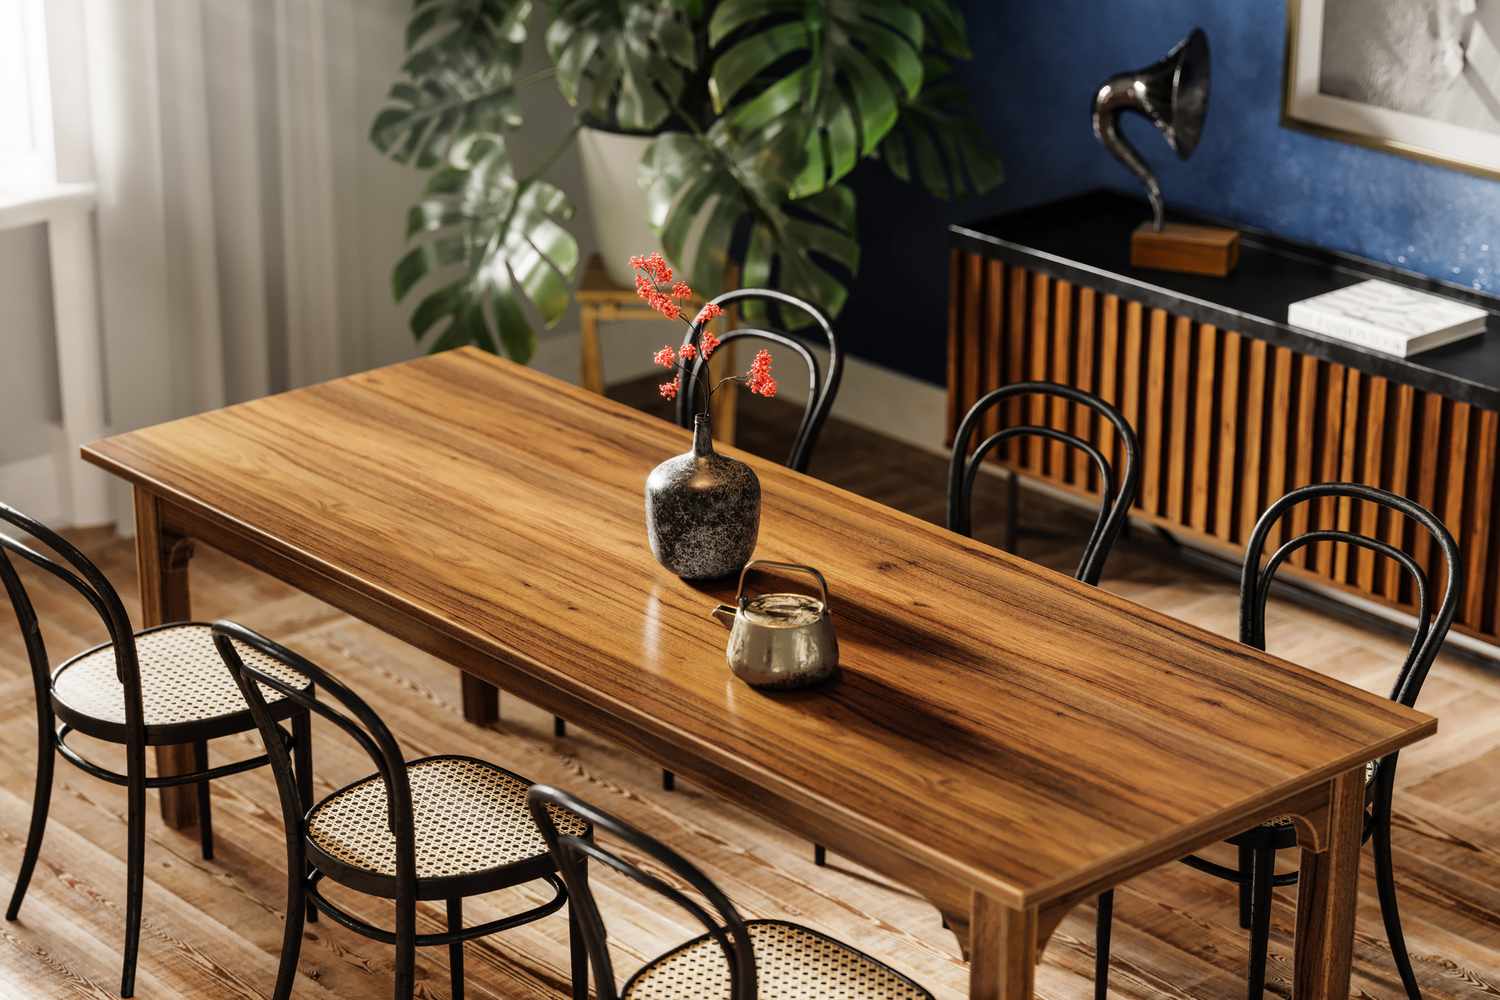 How To Shorten A Long Plank-Style Wood Table